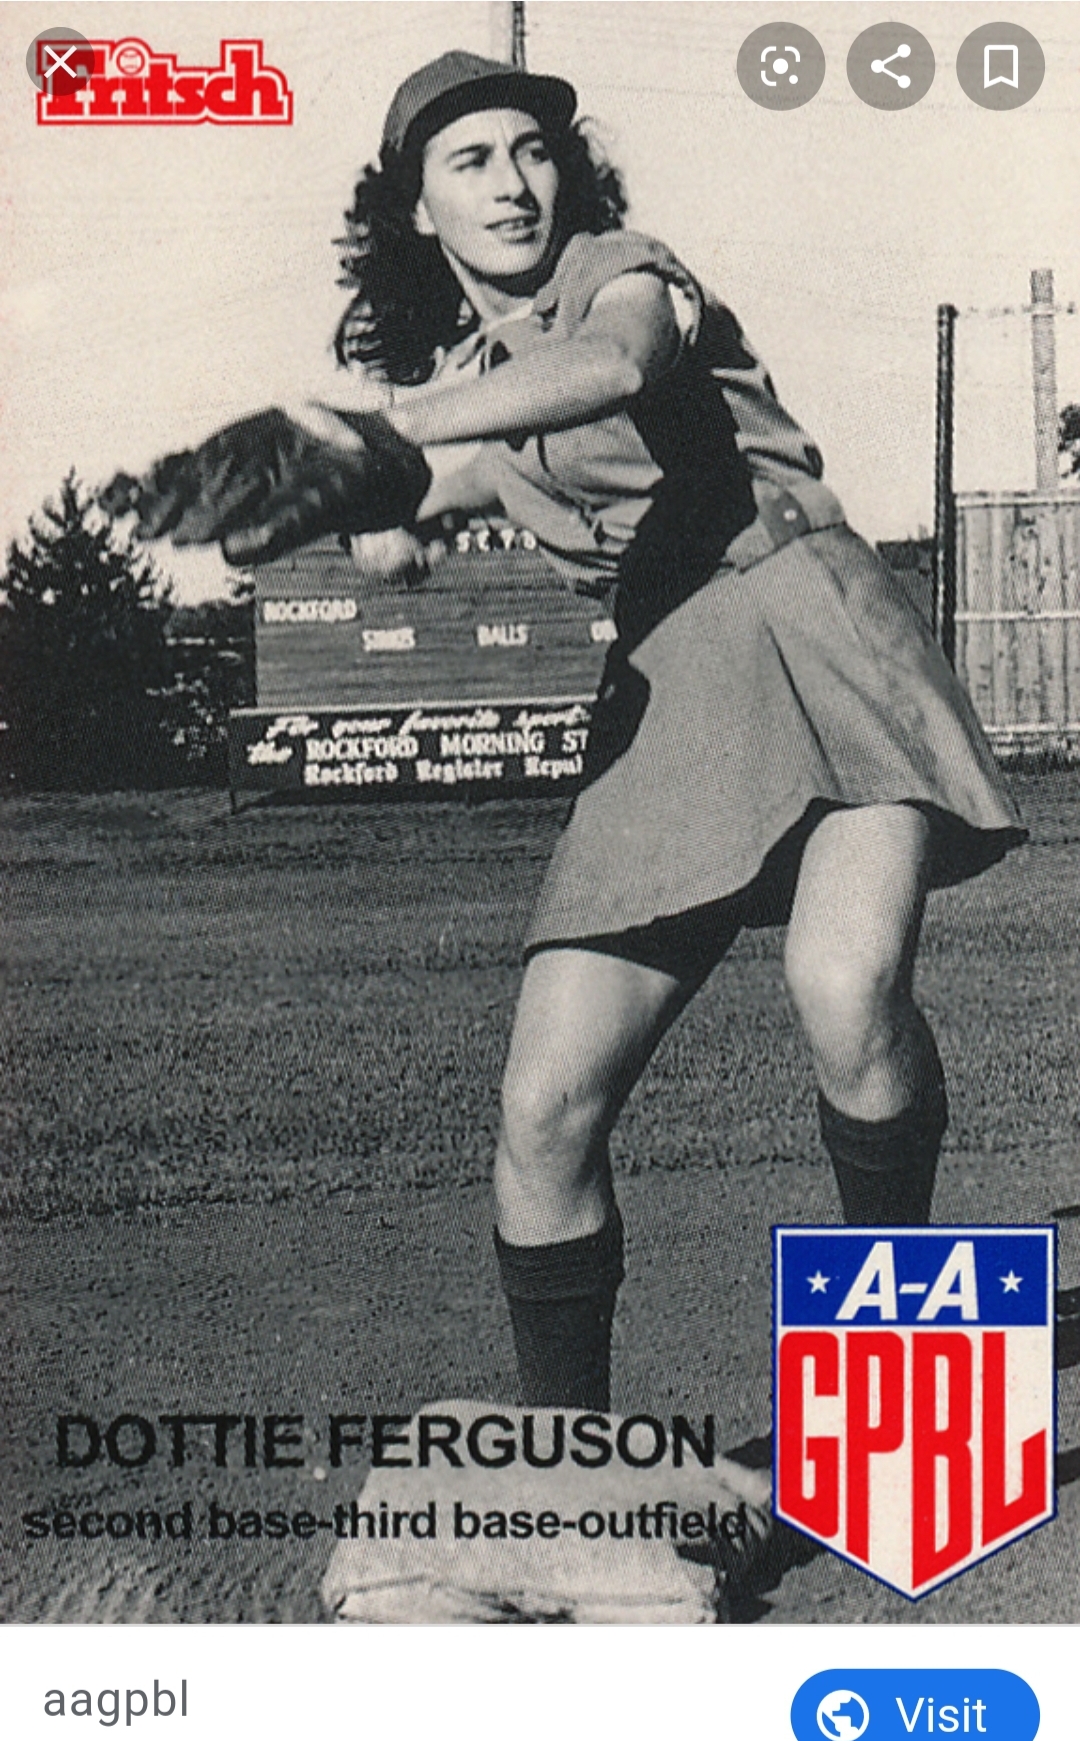 Courtesy of AAGPBL